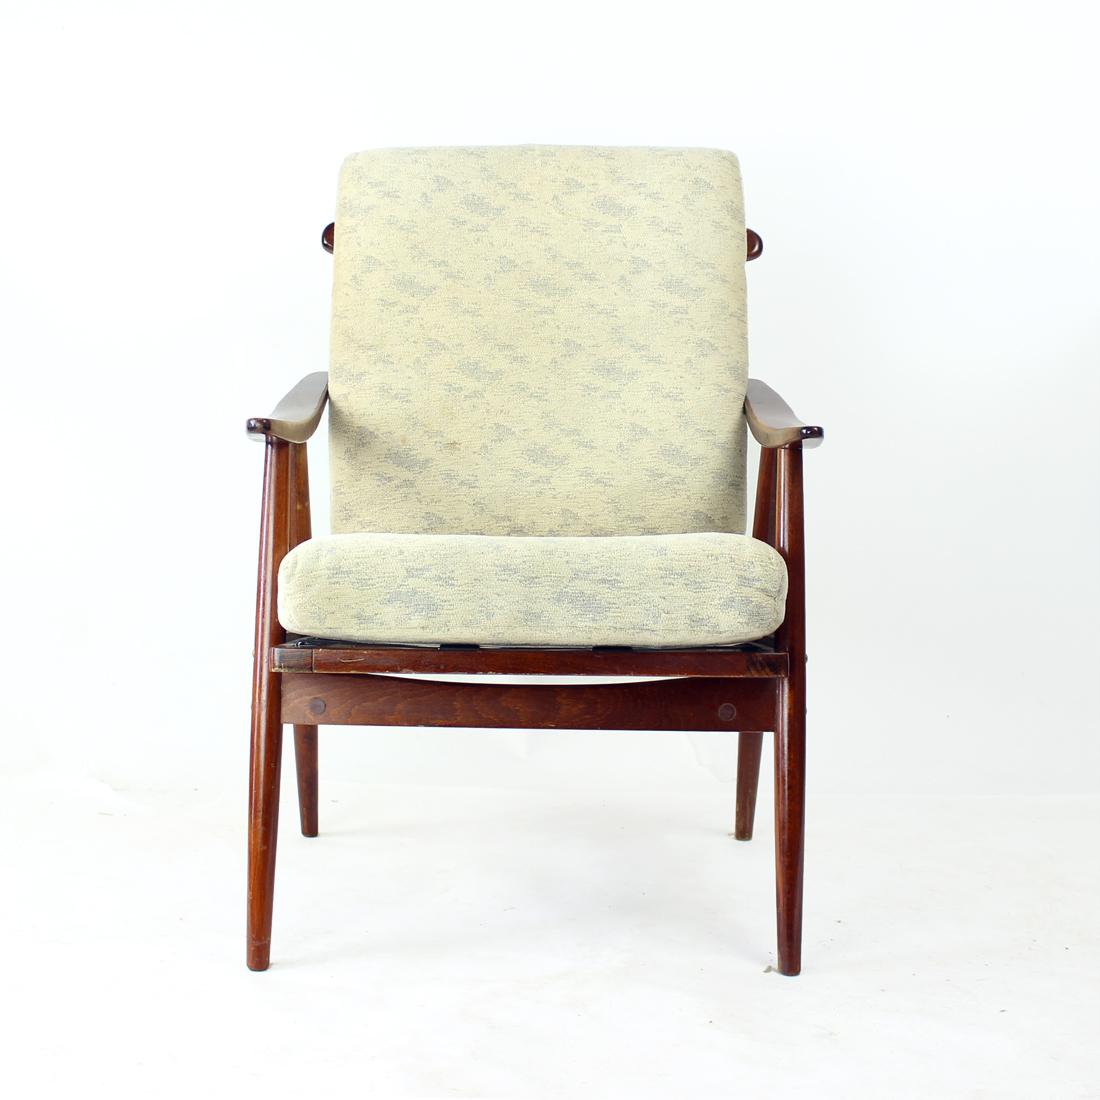 Iconic Boomerang armchair produced by TON company in 1960s in Czechoslovakia. The name comes from the curved armrests. The chairs are produced as elegant and airy design with light, but strong construction. The seat and backrest cushion are in